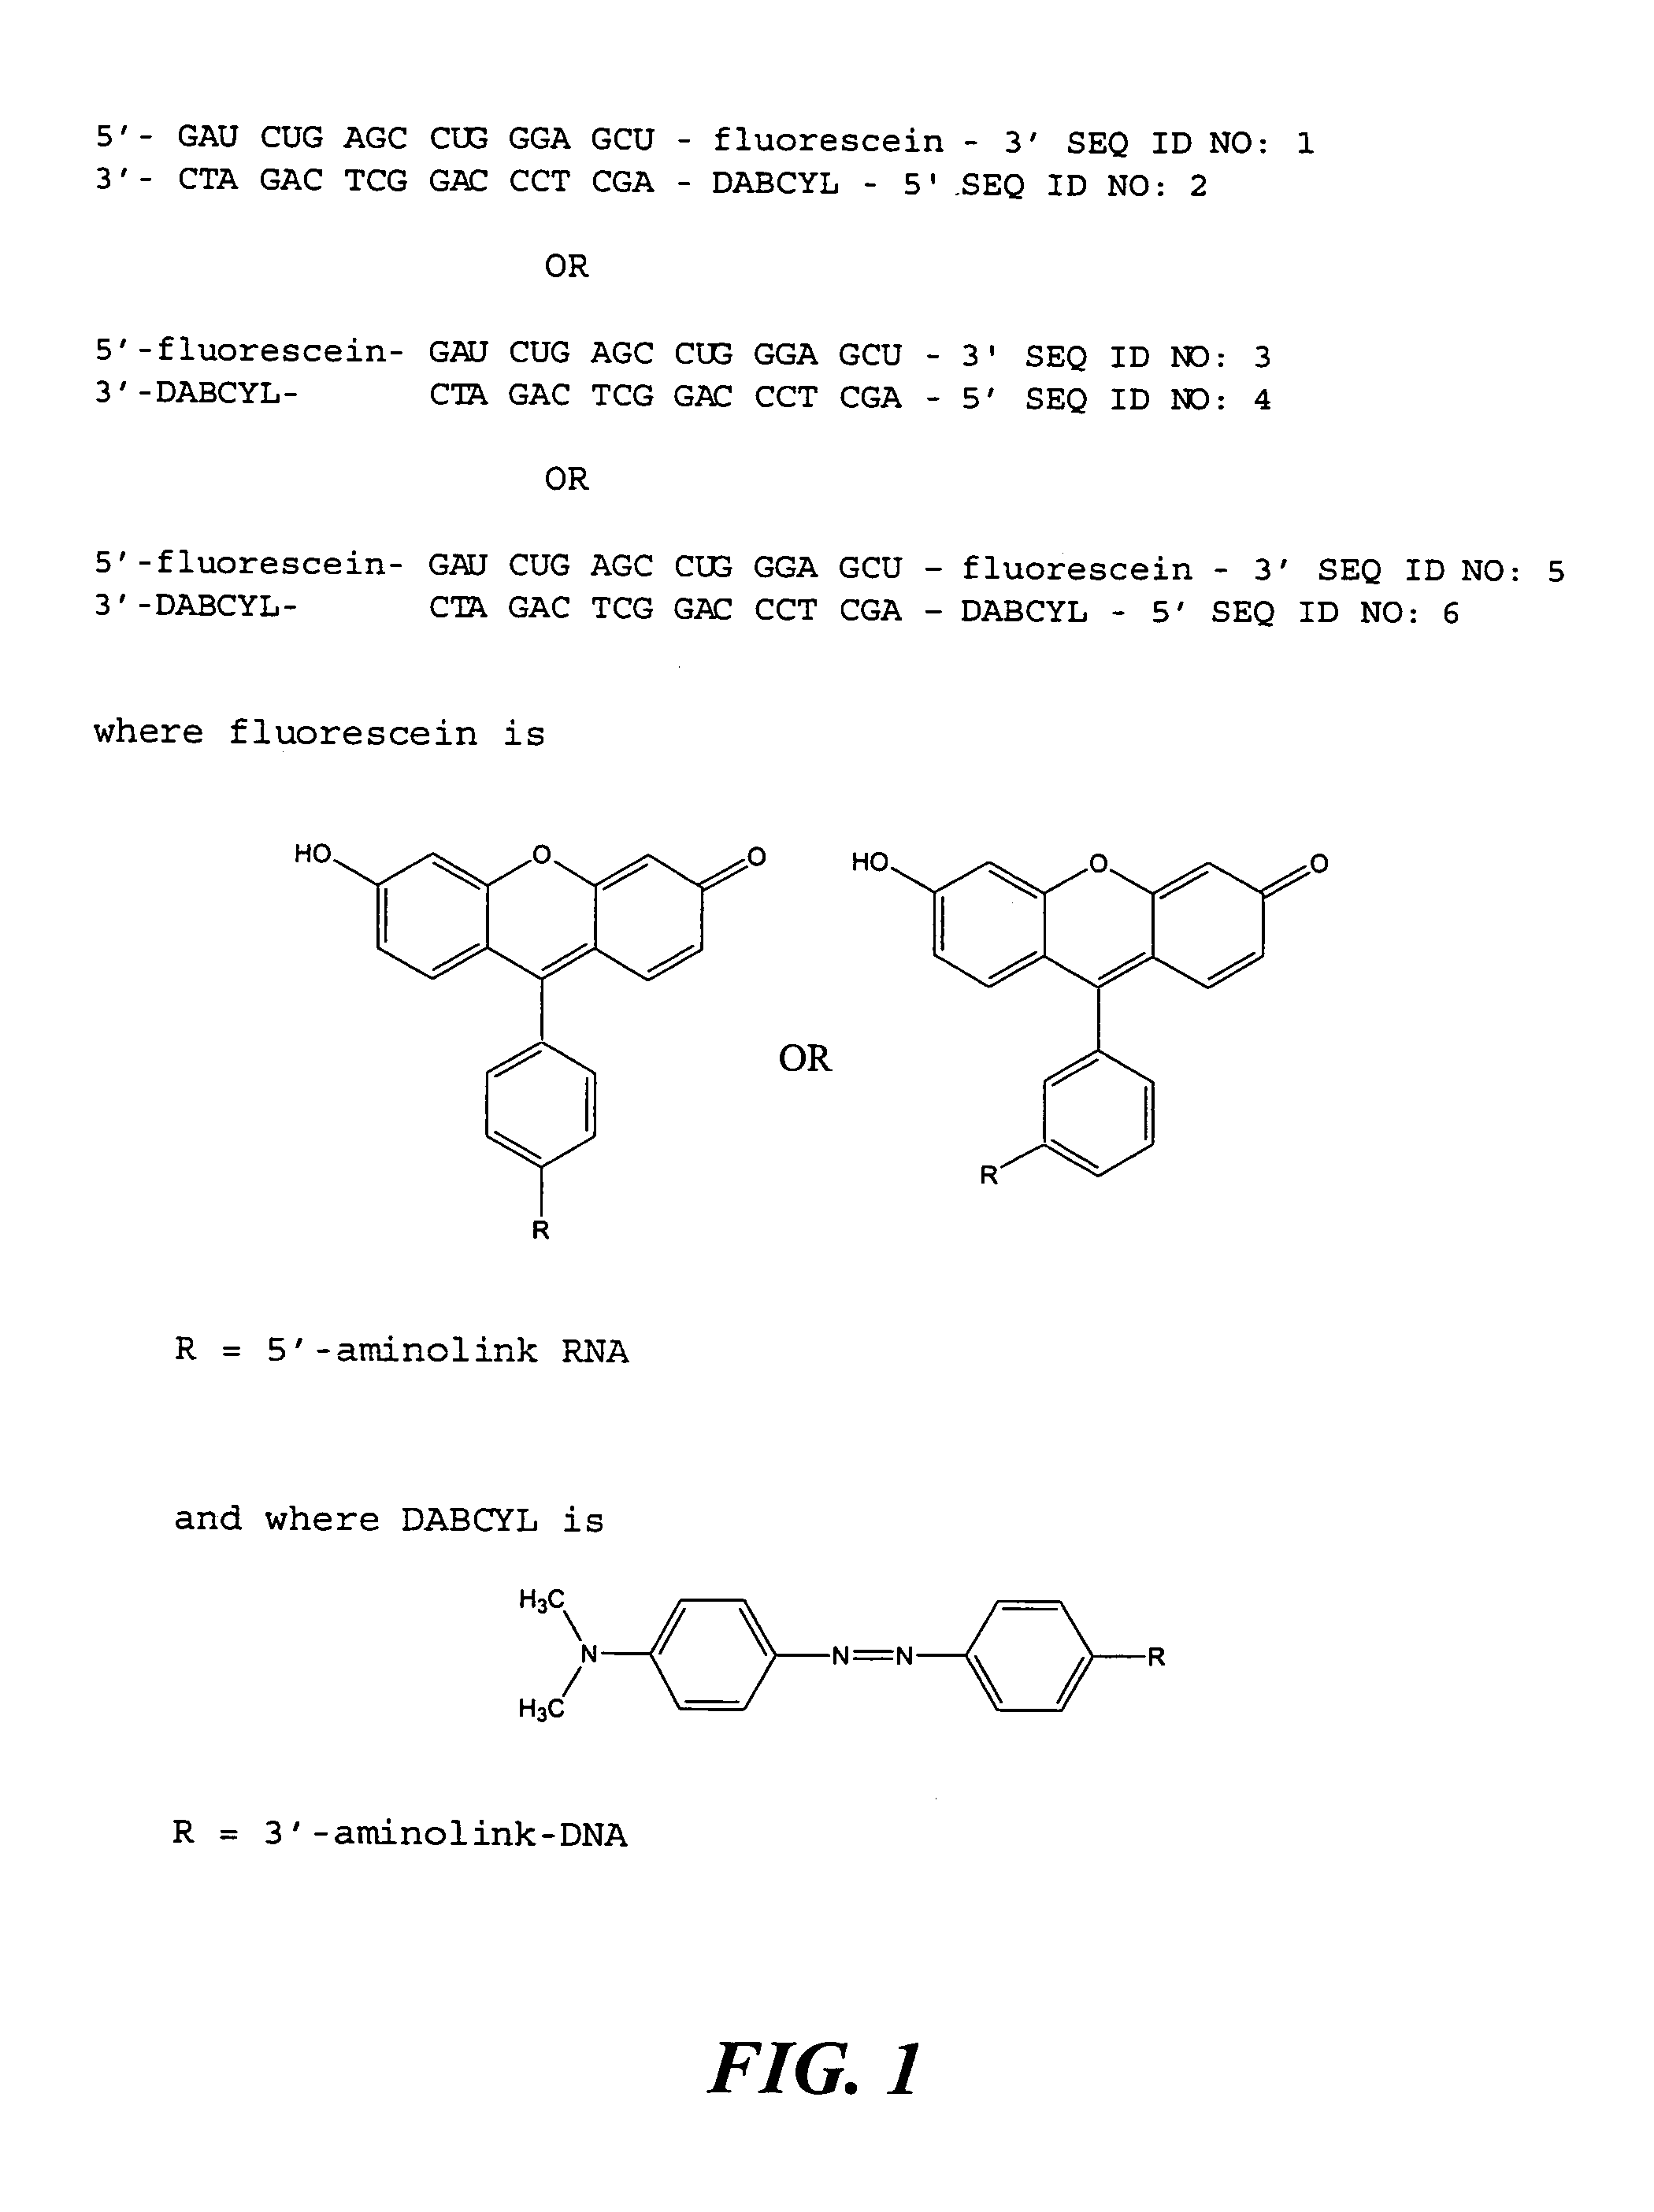 Method of identifying or characterizing a compound that modulates ribonuclease H activity